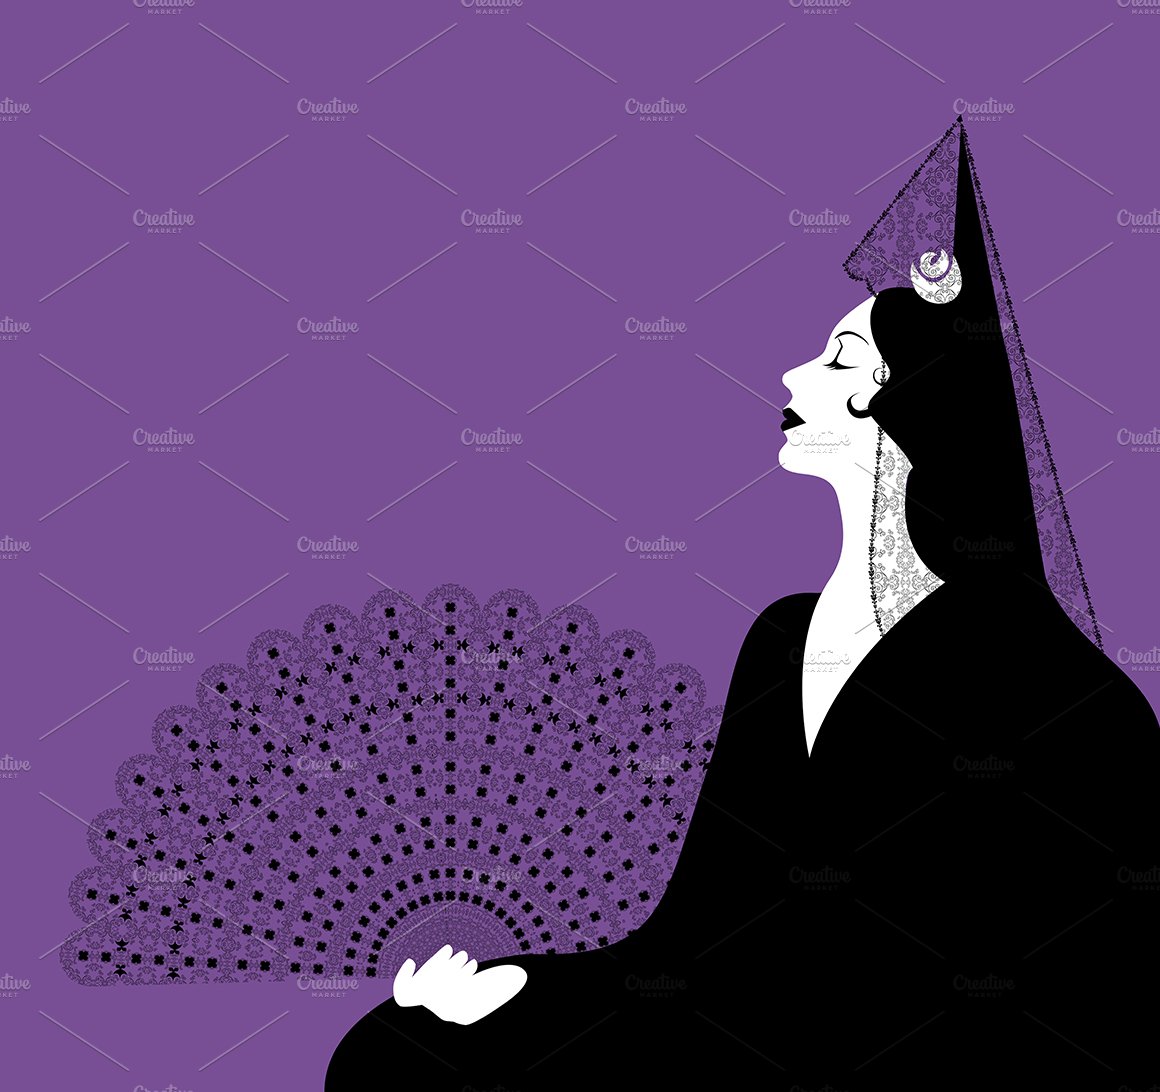 Spanish woman with lace mantilla cover image.